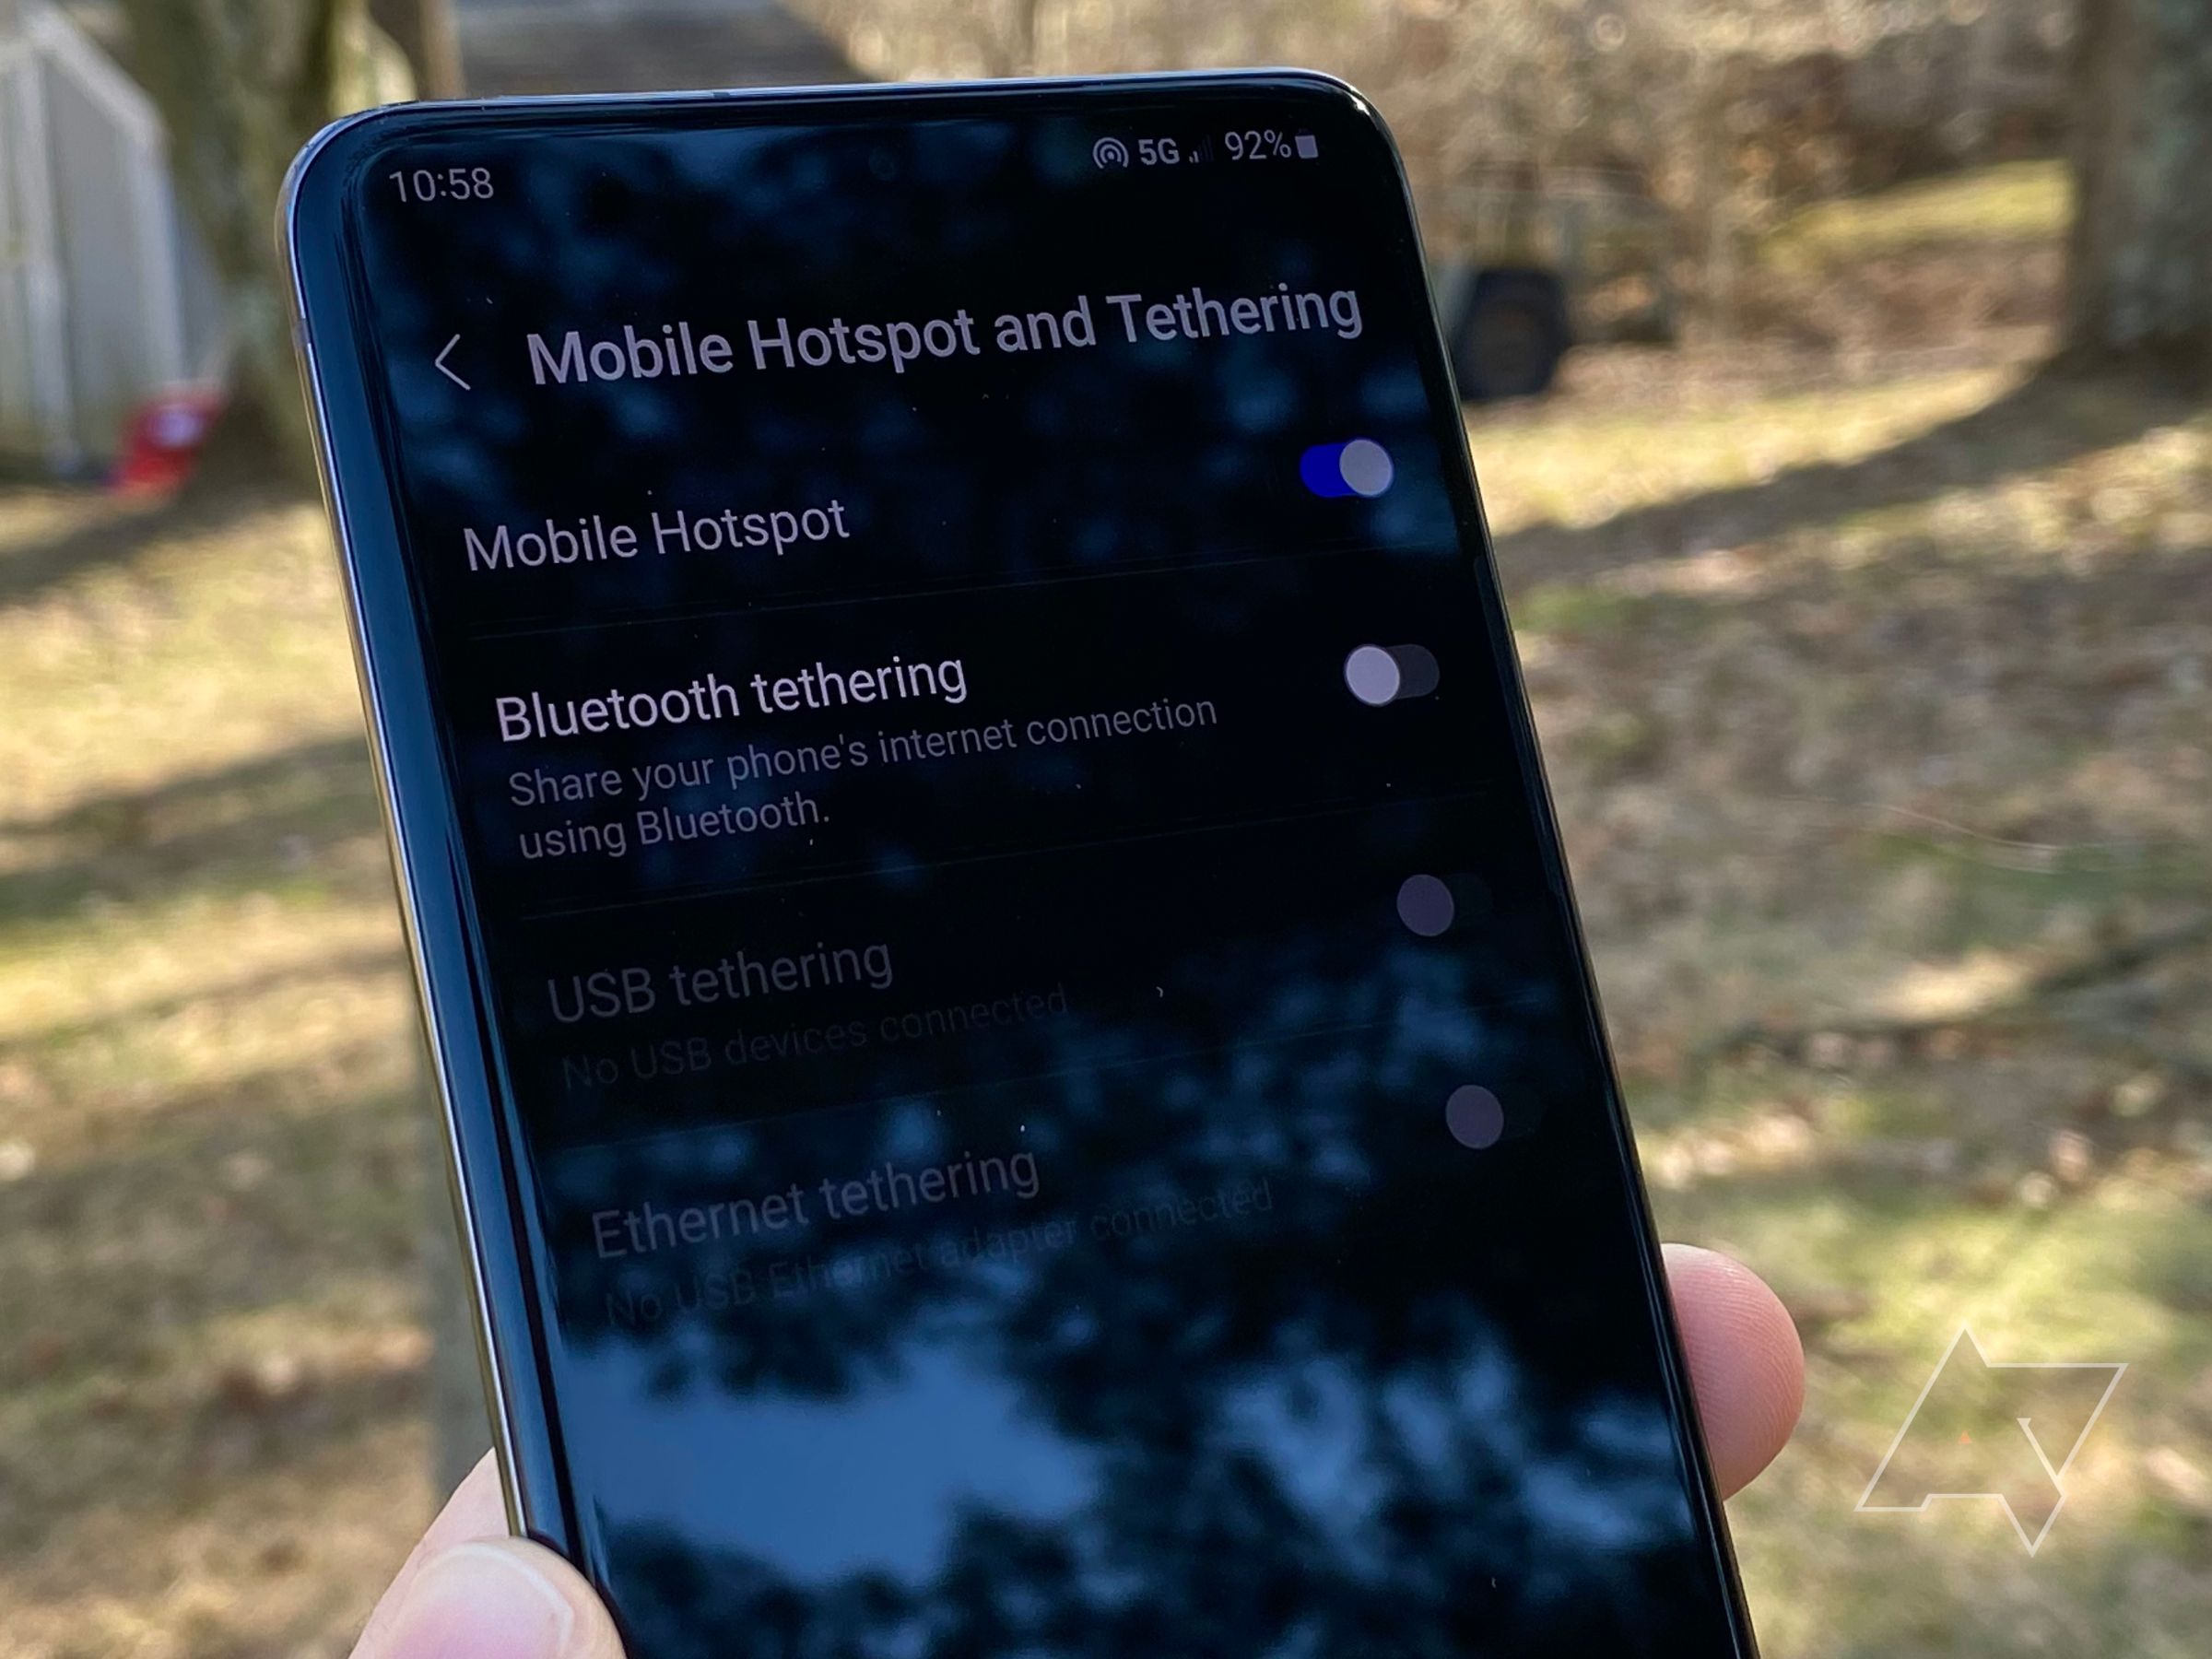 Mobile Hotspot settings on a Samsung Galaxy S20+